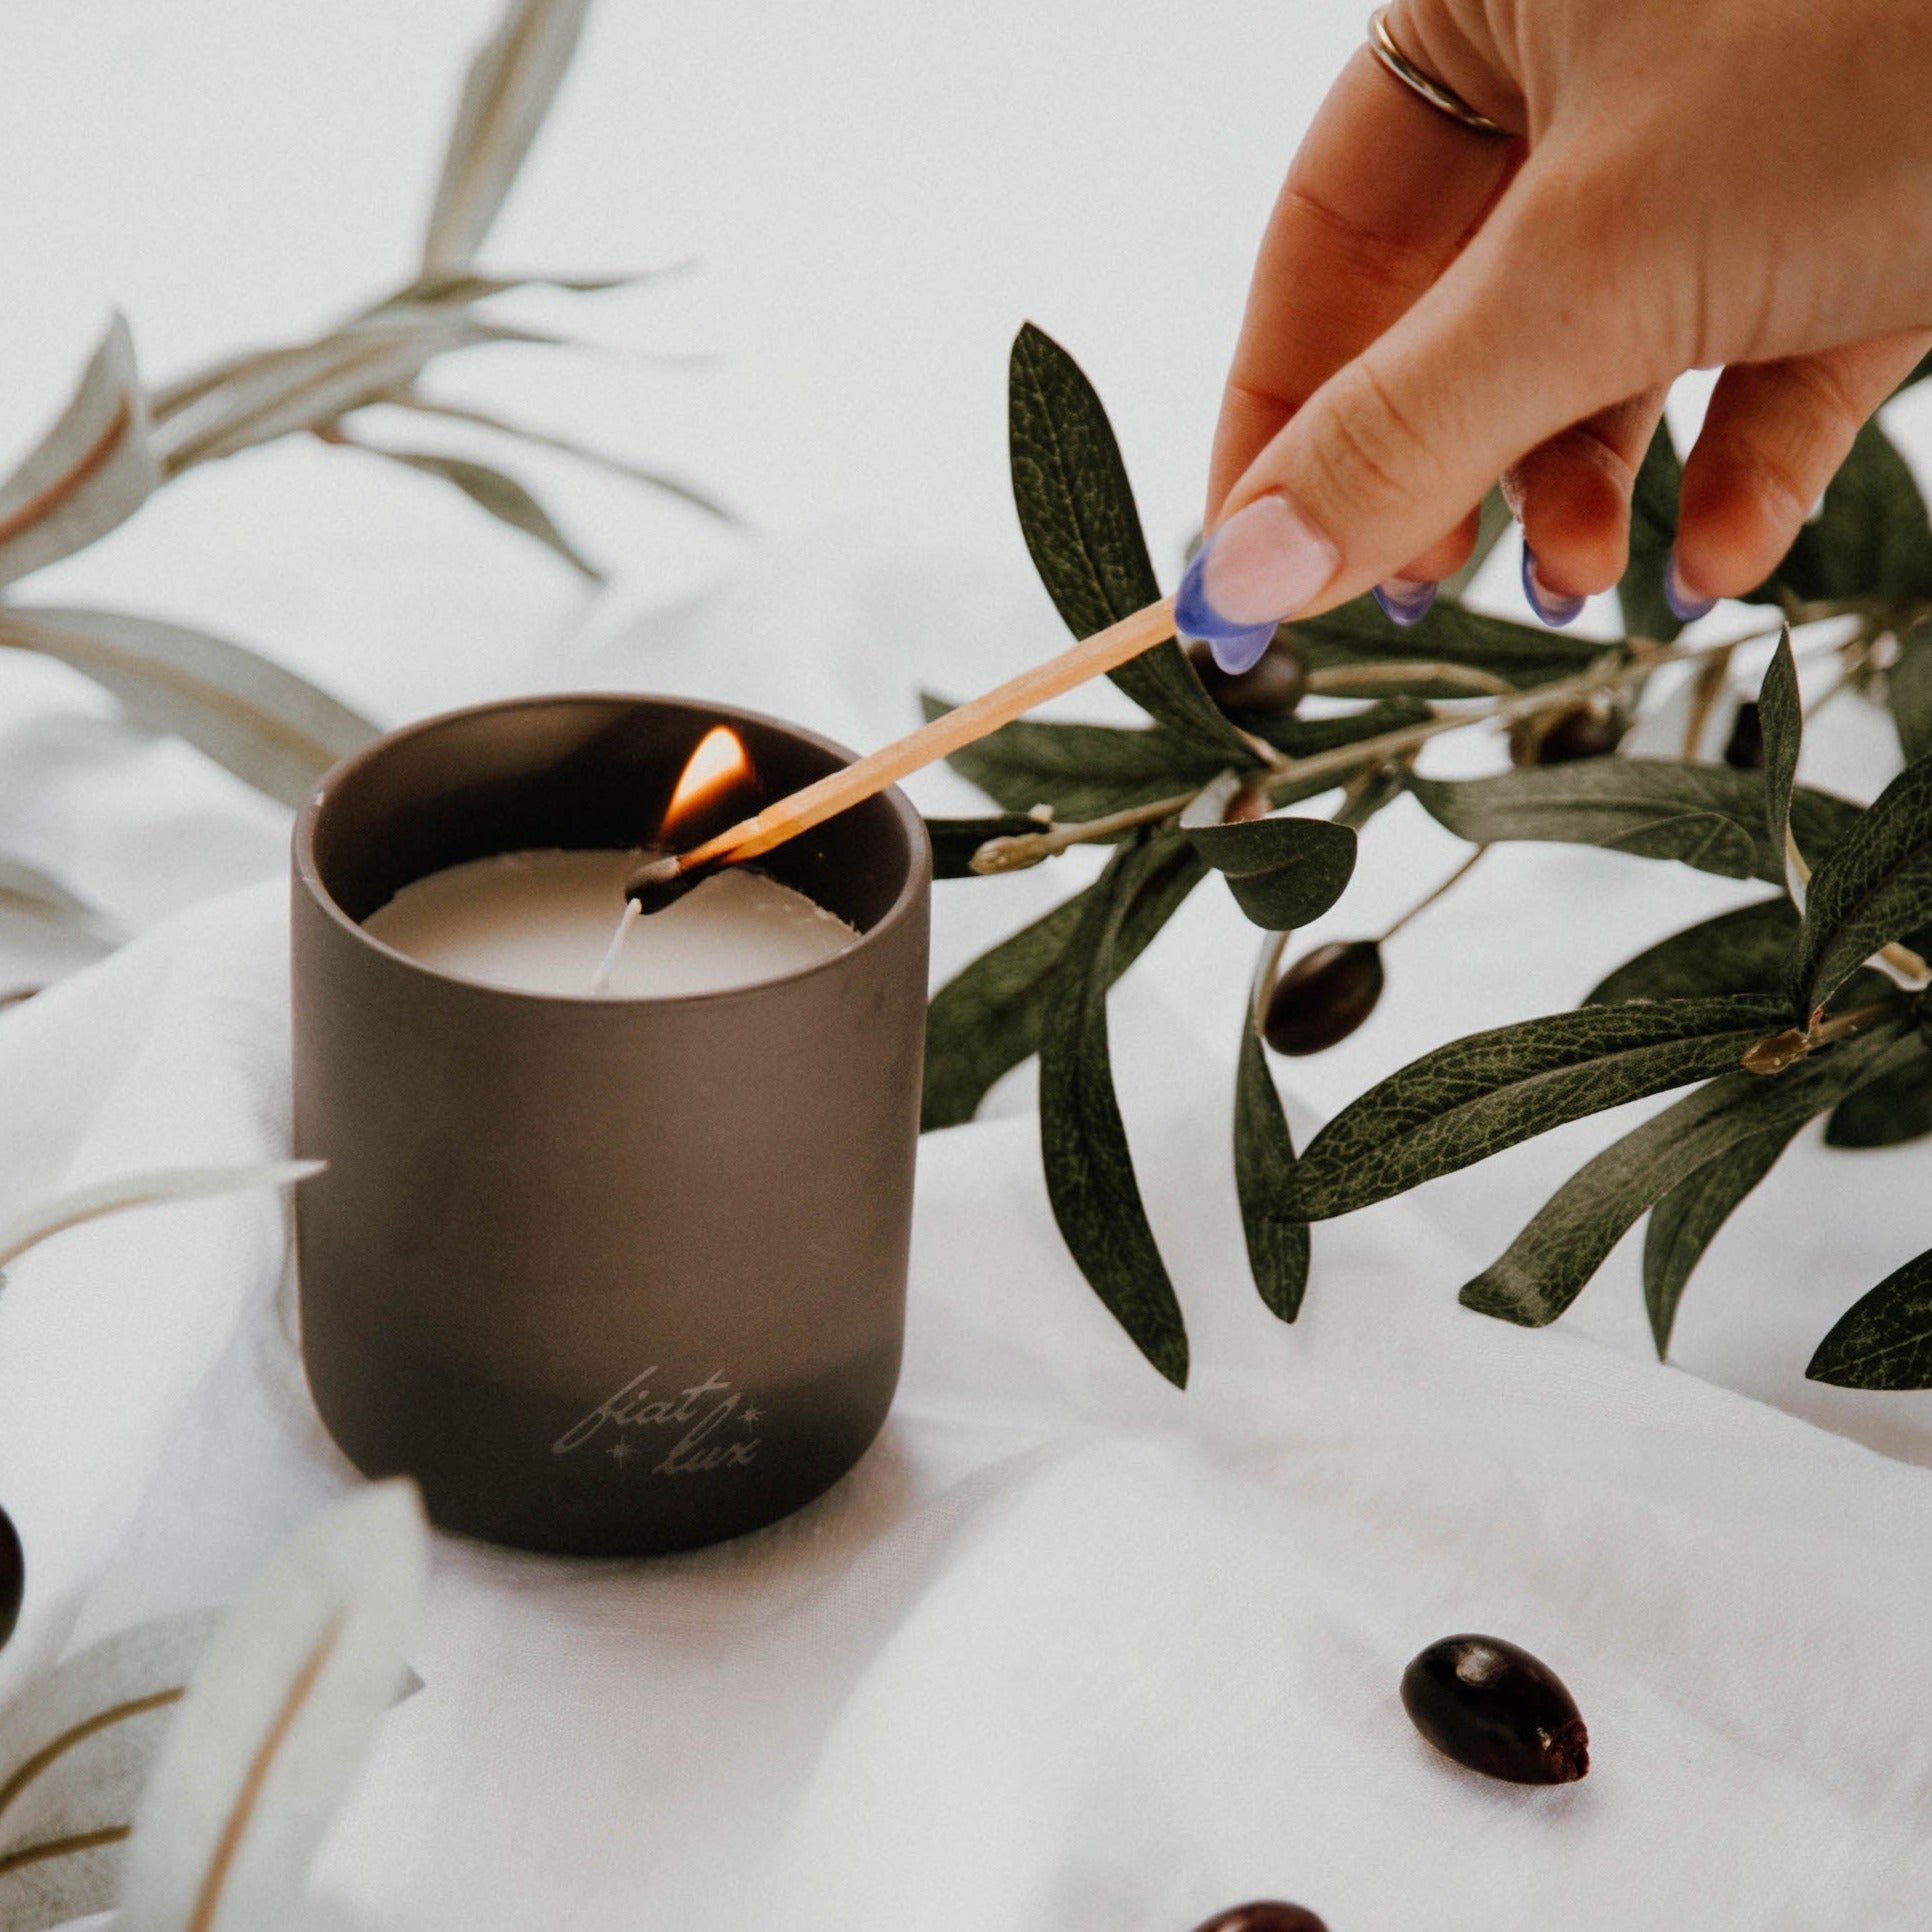 A black ceramic candle jar filled with white wax and a lit wick (Fiat Lux Valldemossa) surrounded by olive branches and Kalamata olives.